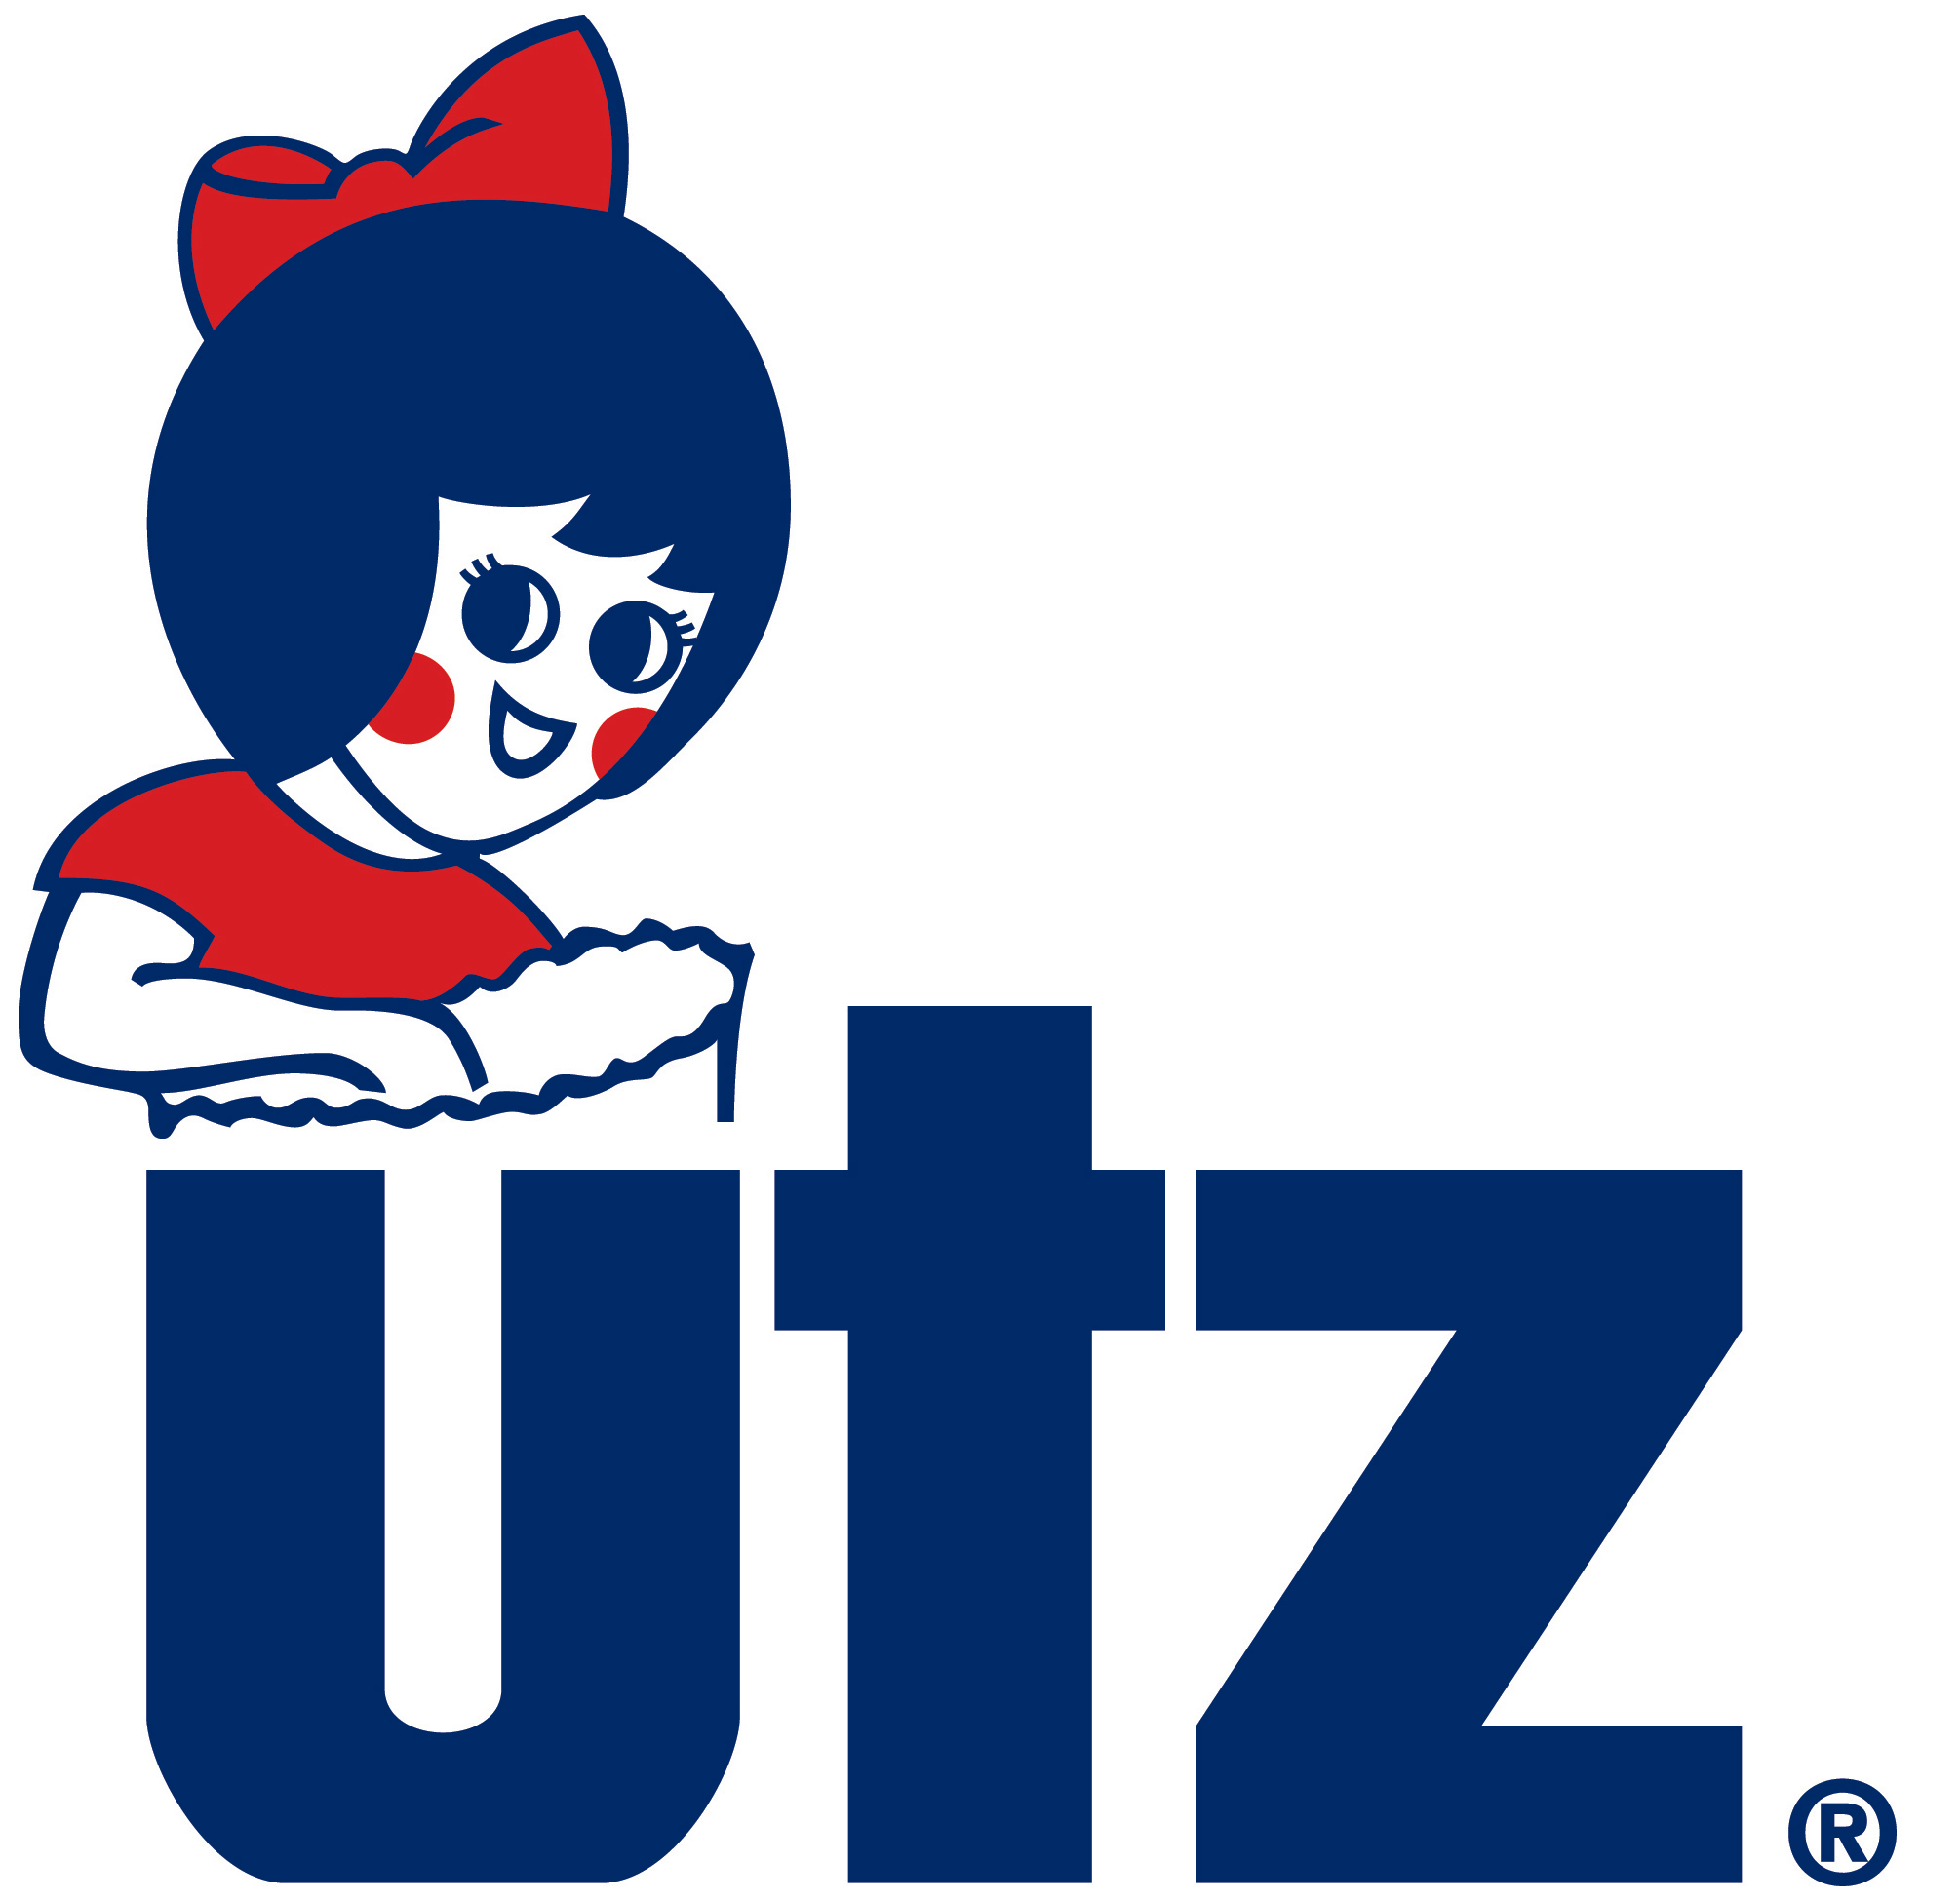 Utz Brands, Inc. - Utz® To Be Presenting Sponsor of American League  Division Series